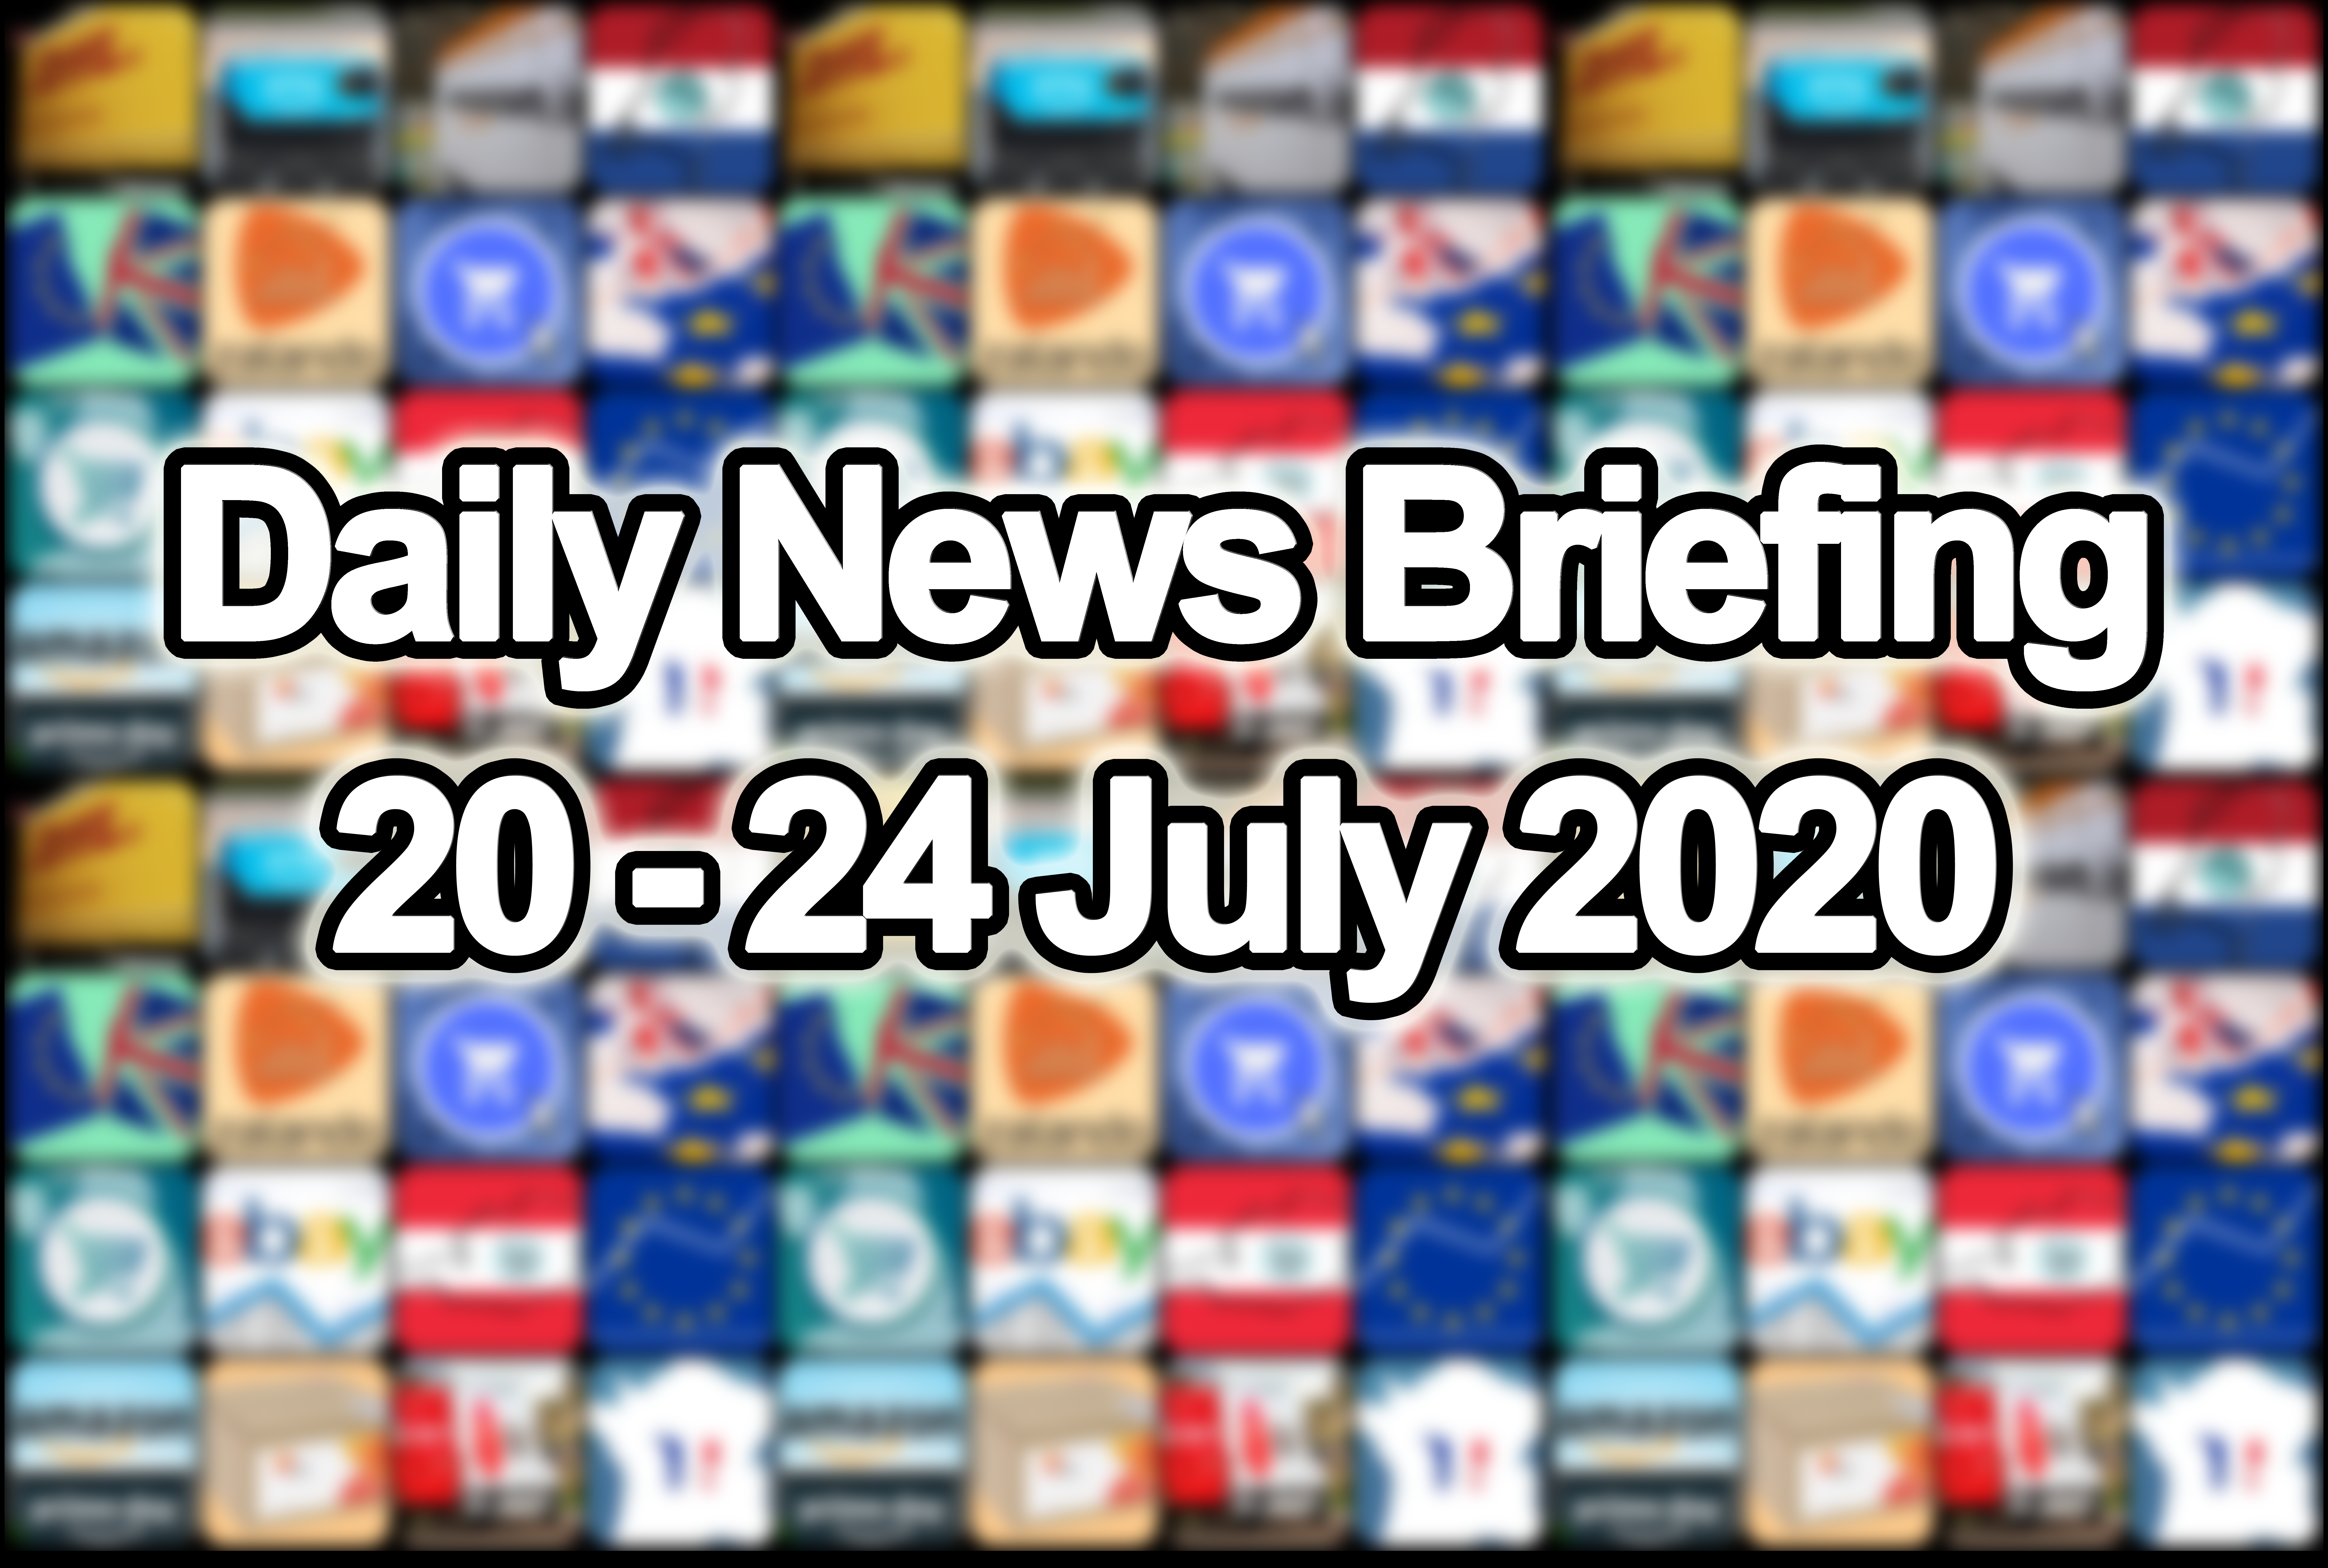 Daily News Briefing – The Top E-commerce & VAT Stories of 20-24 July